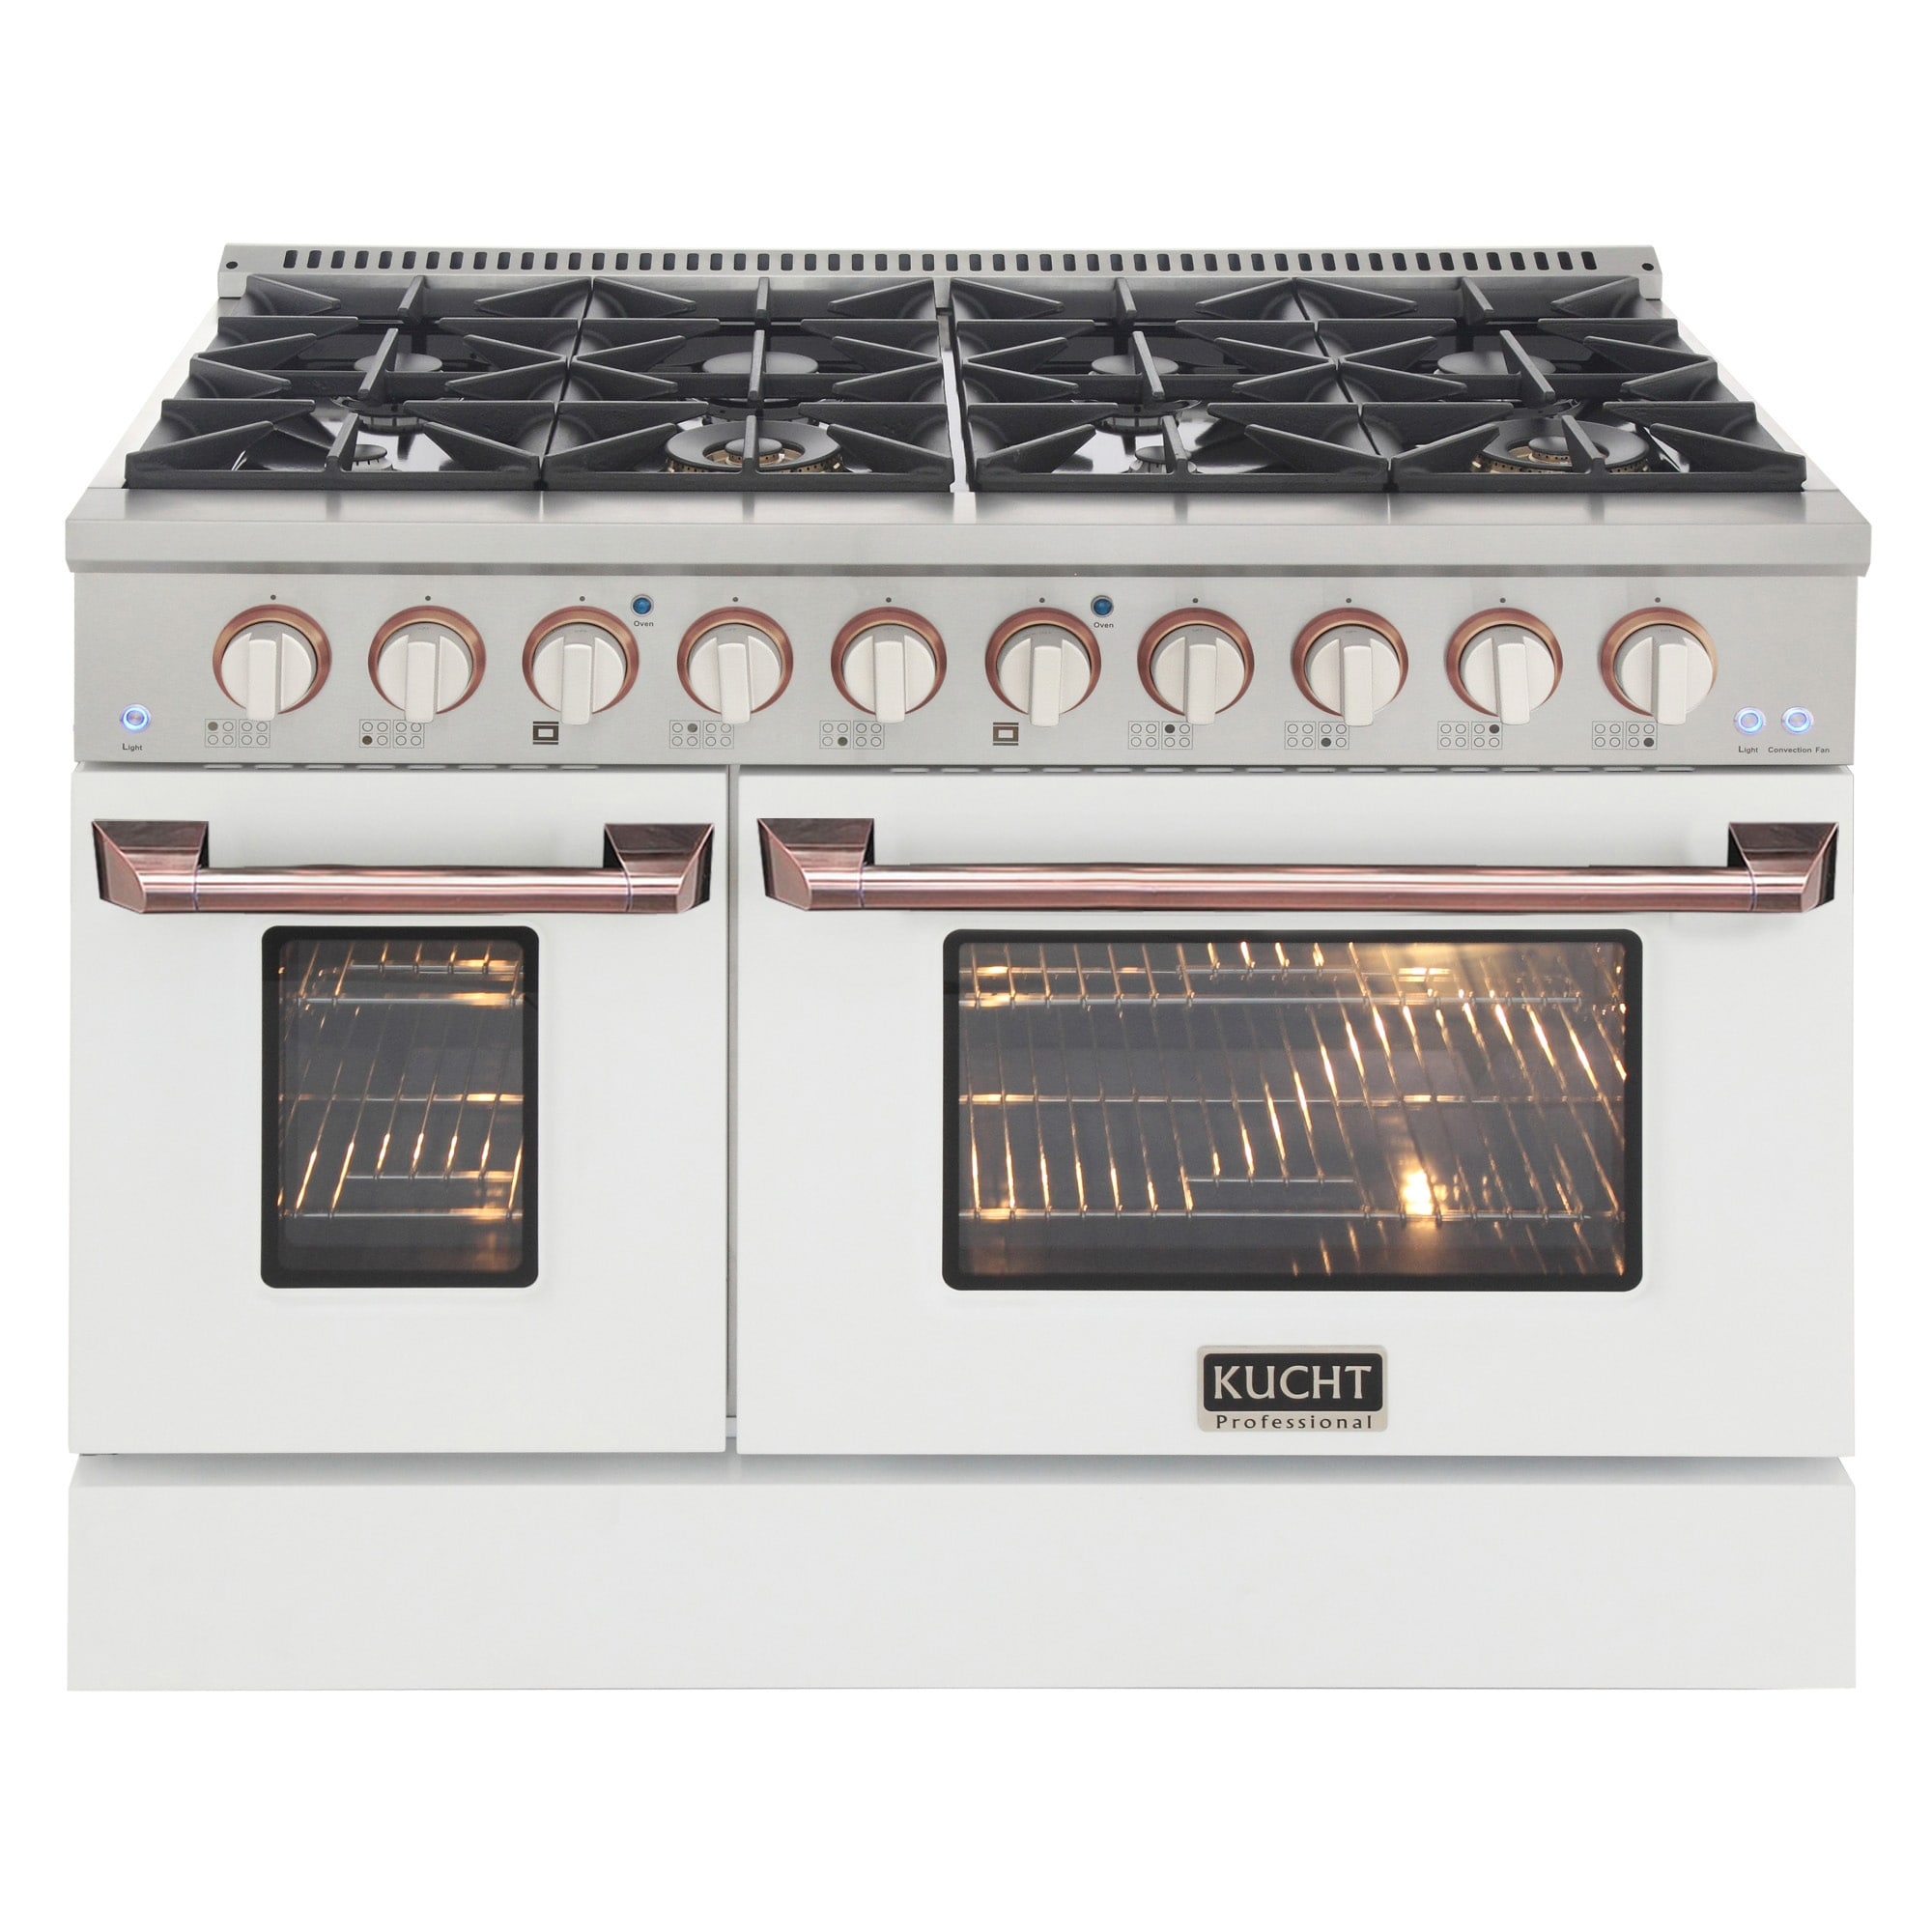 KUCHT Professional 48 in. 6.7 cu. ft. Natural Gas Range with Sealed Burners and Convection Oven in SS with customized colors